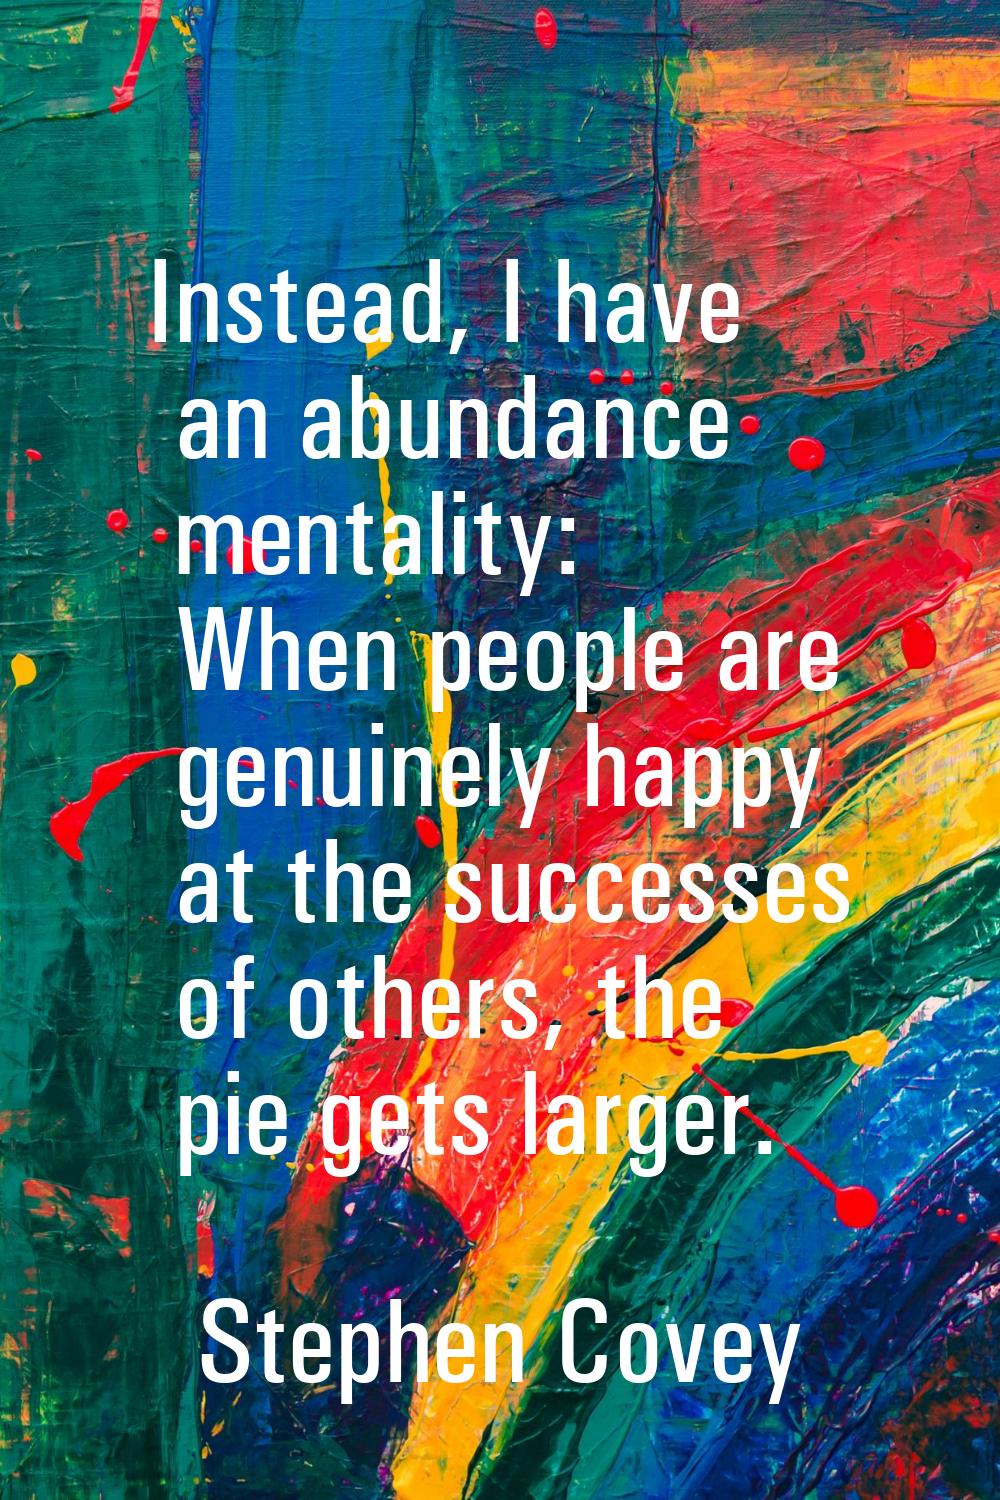 Instead, I have an abundance mentality: When people are genuinely happy at the successes of others,